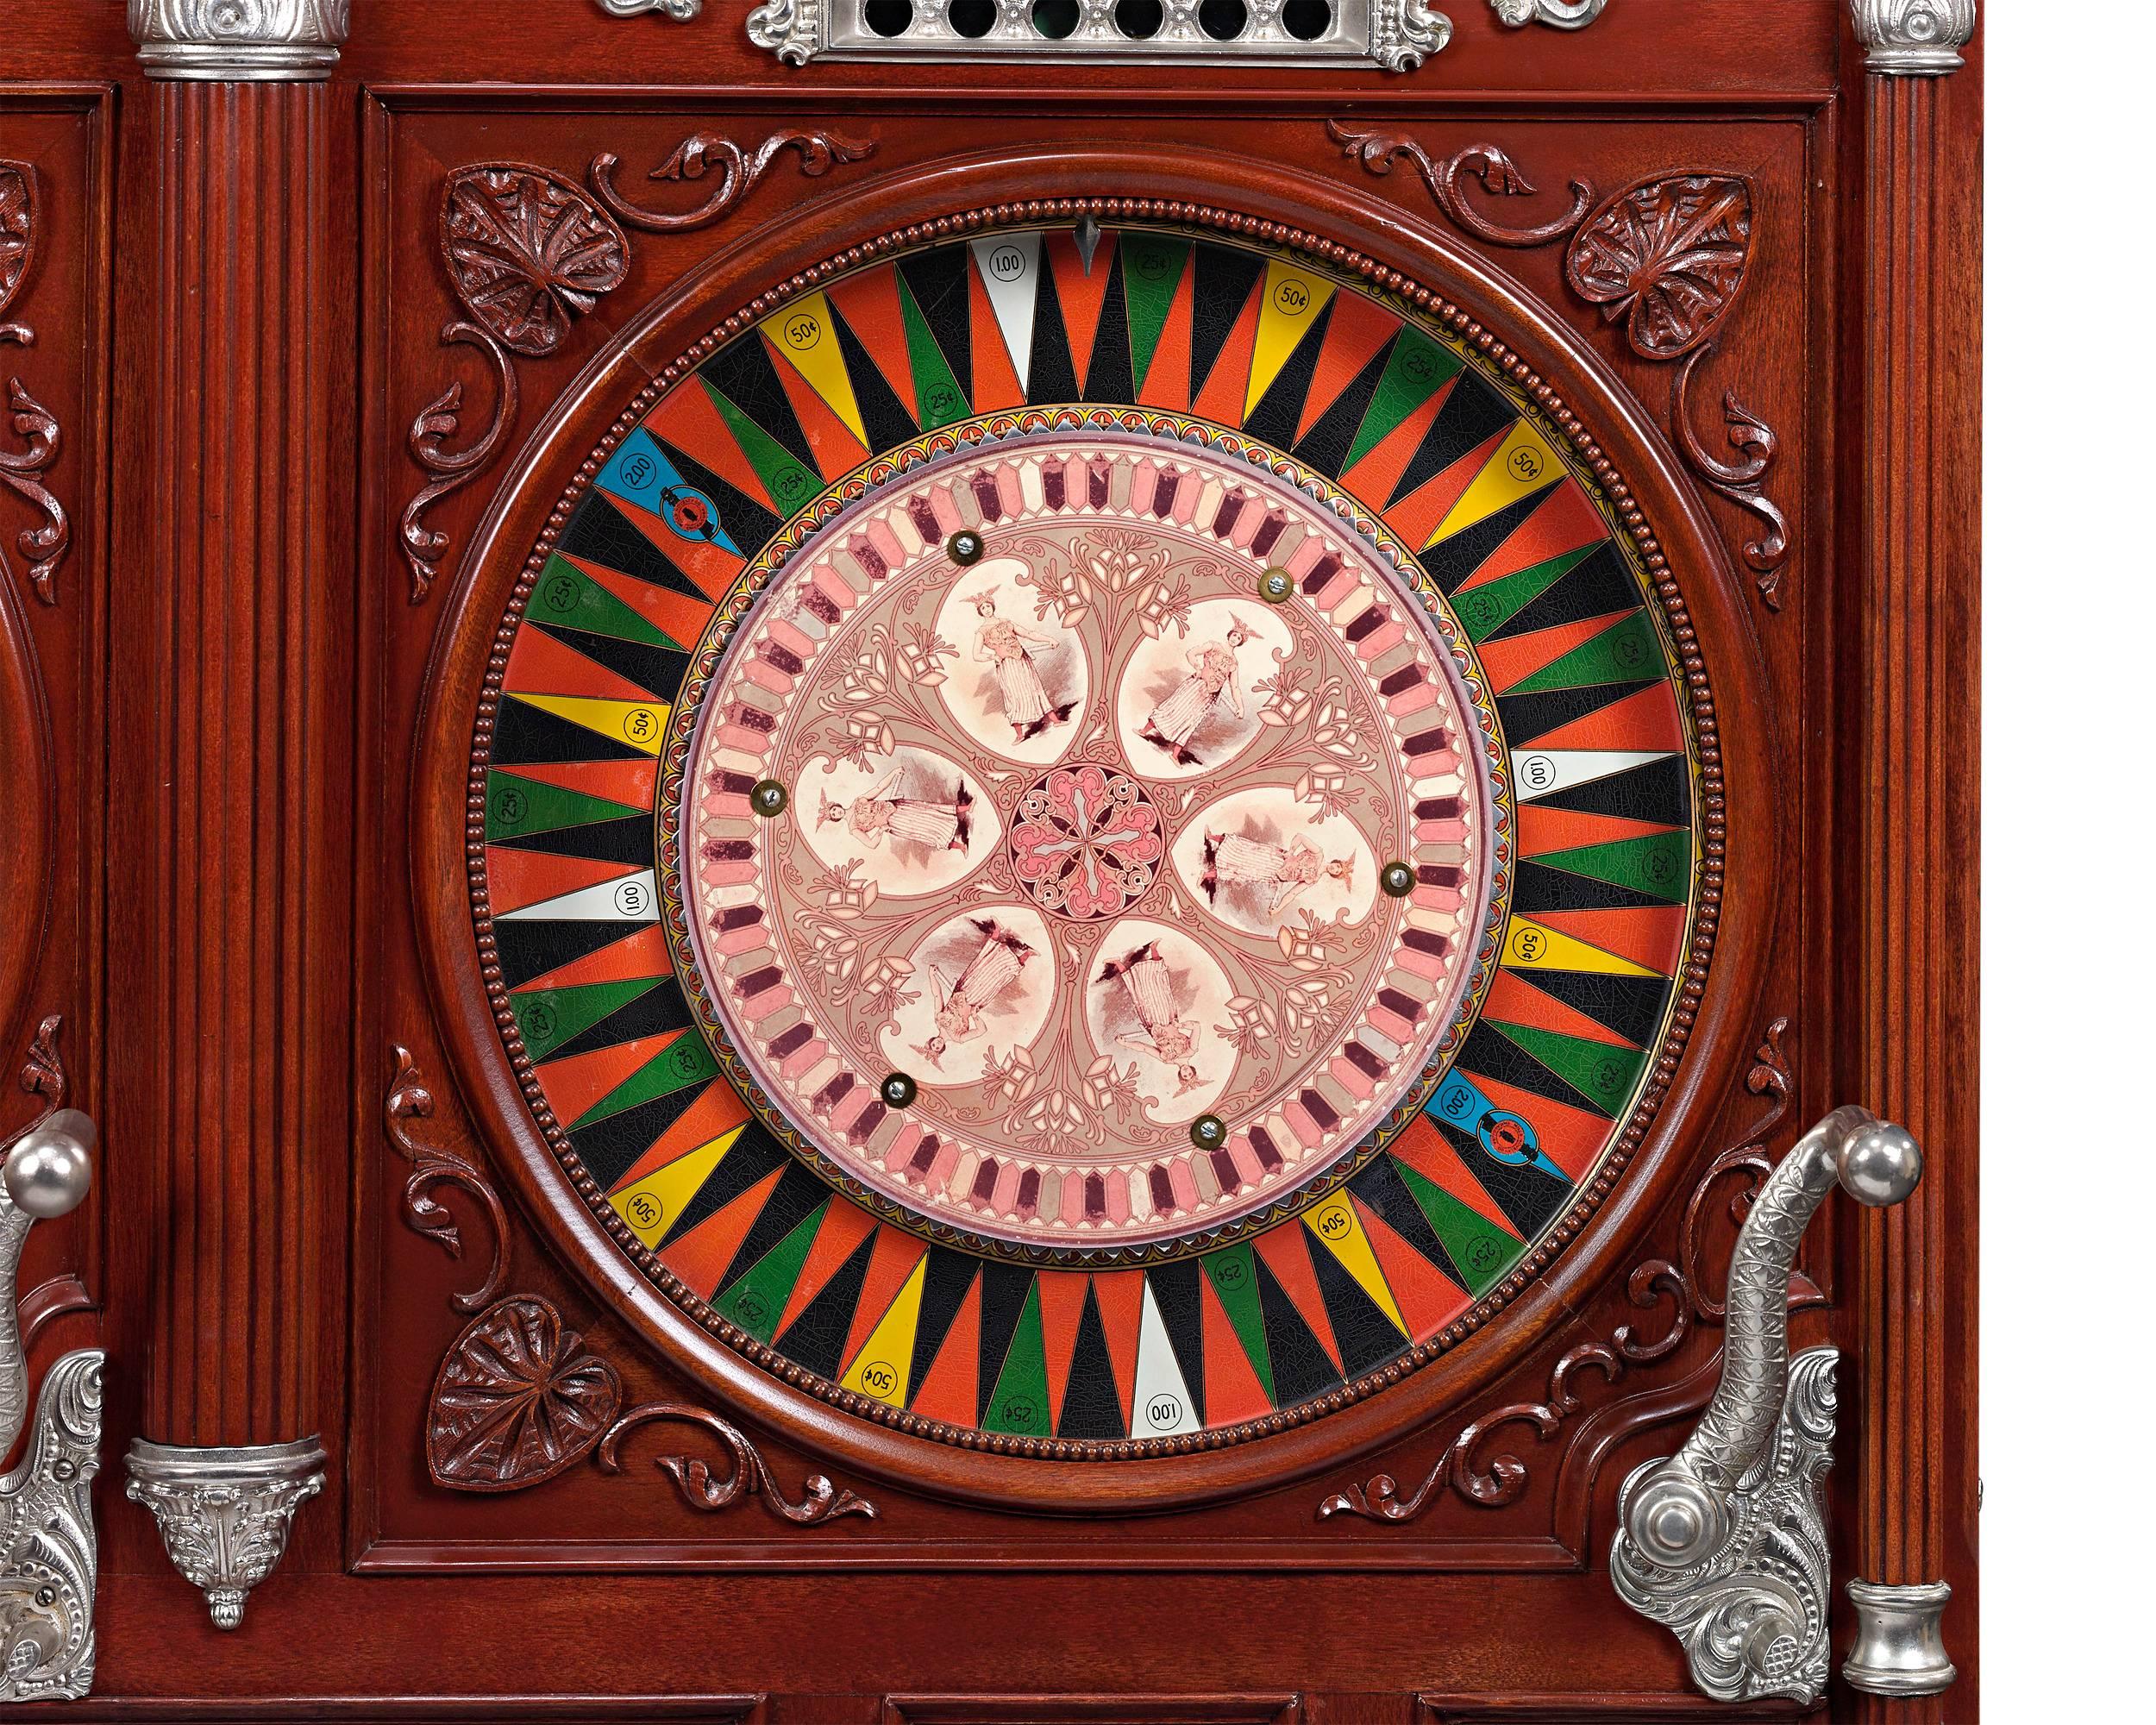 This extraordinary rare double upright slot machine was built by the leader of the slot machine movement in Chicago and around the world, the Mills Novelty Company. Manufactured during the golden age of the slot machine in the early 20th century,